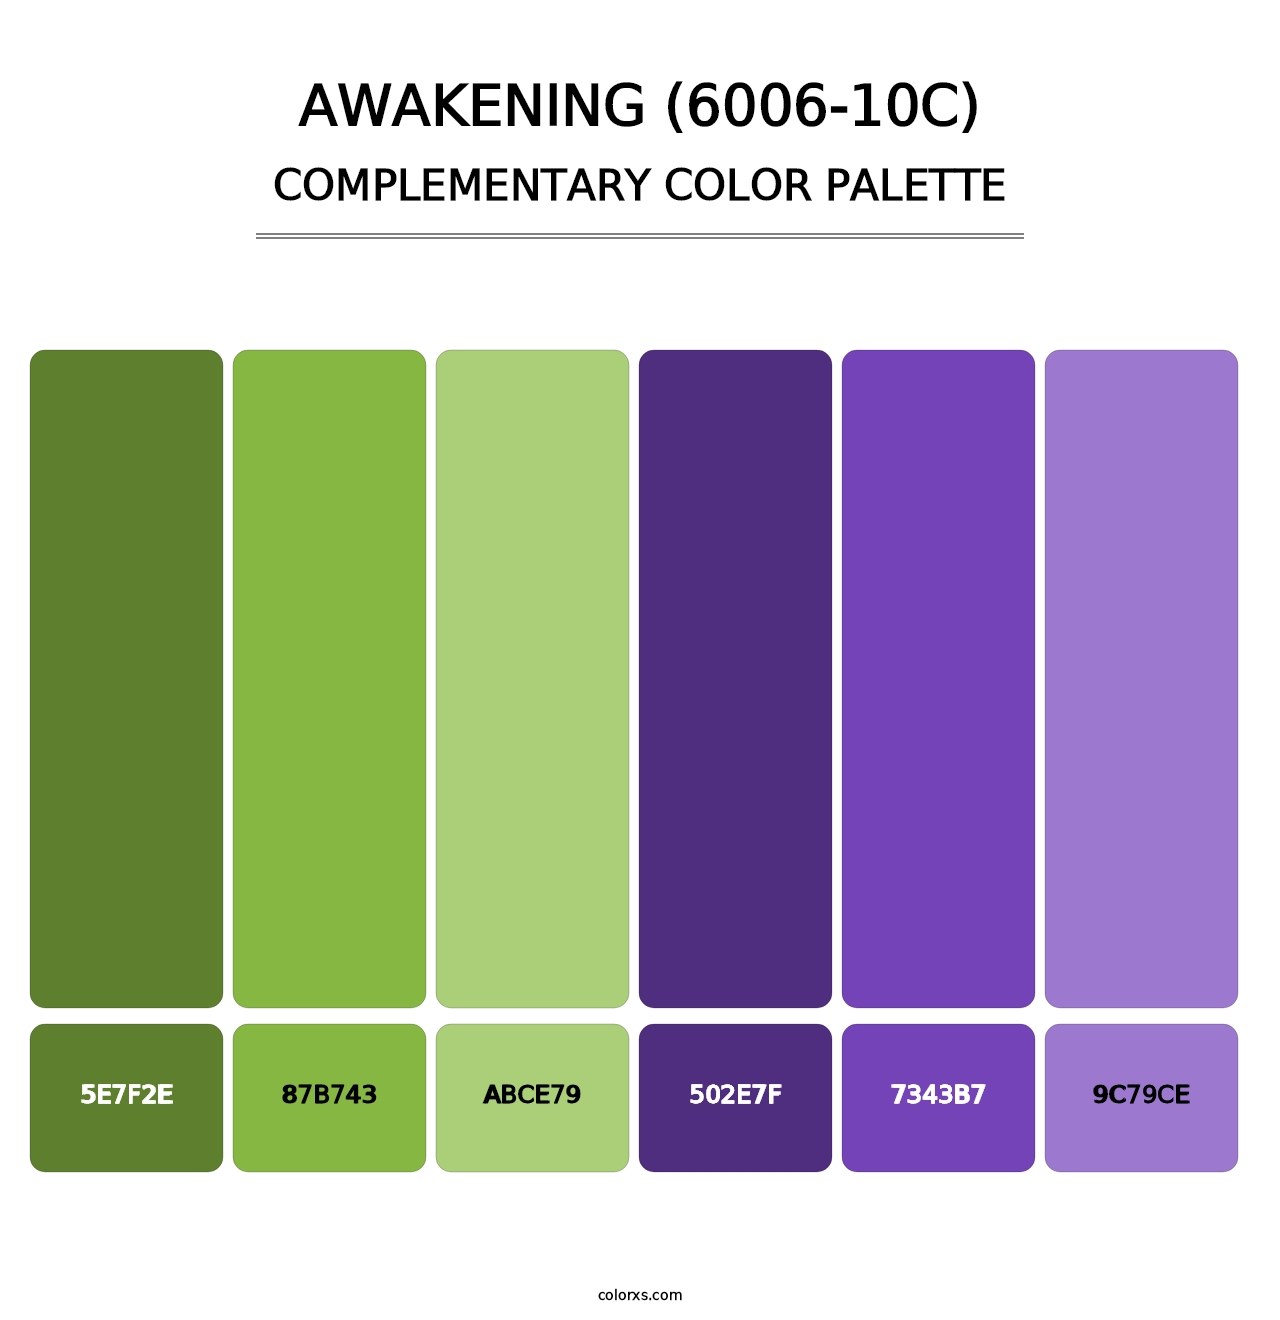 Awakening (6006-10C) - Complementary Color Palette